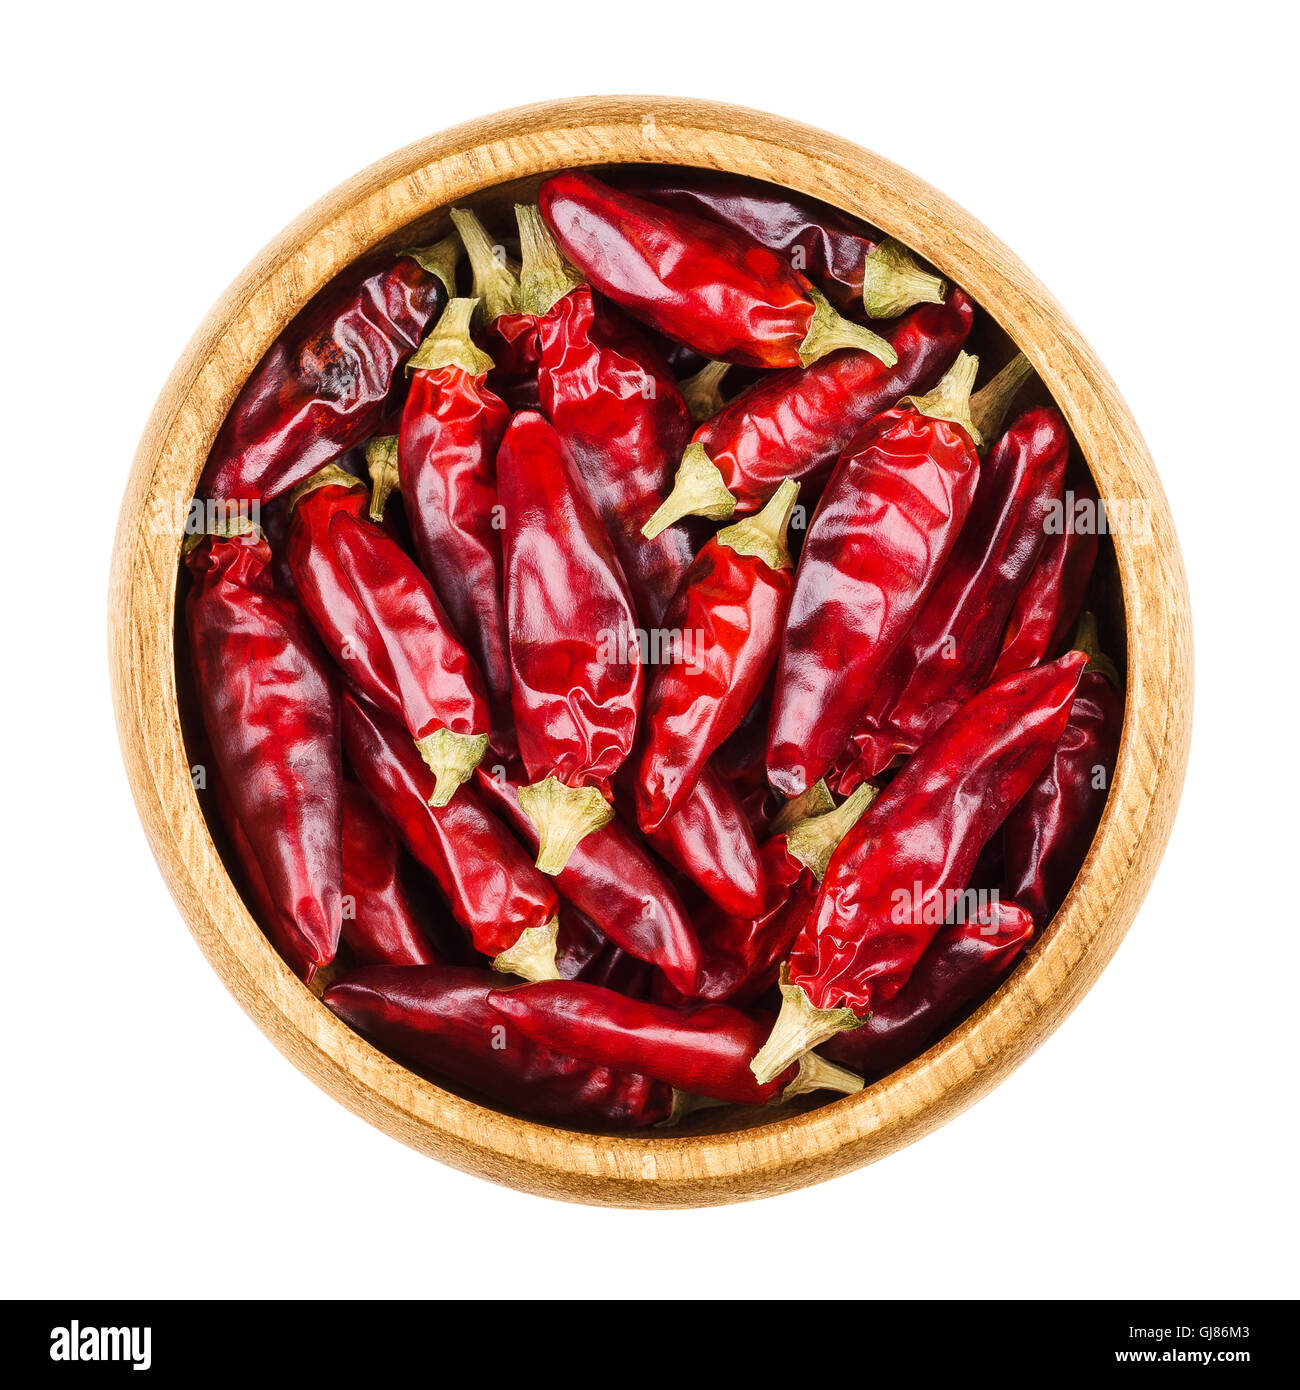 Red hot tabasco chili peppers in a bowl on white background. Dried fruits of Capsicum frutescens, used as spice and for tabasco. Stock Photo